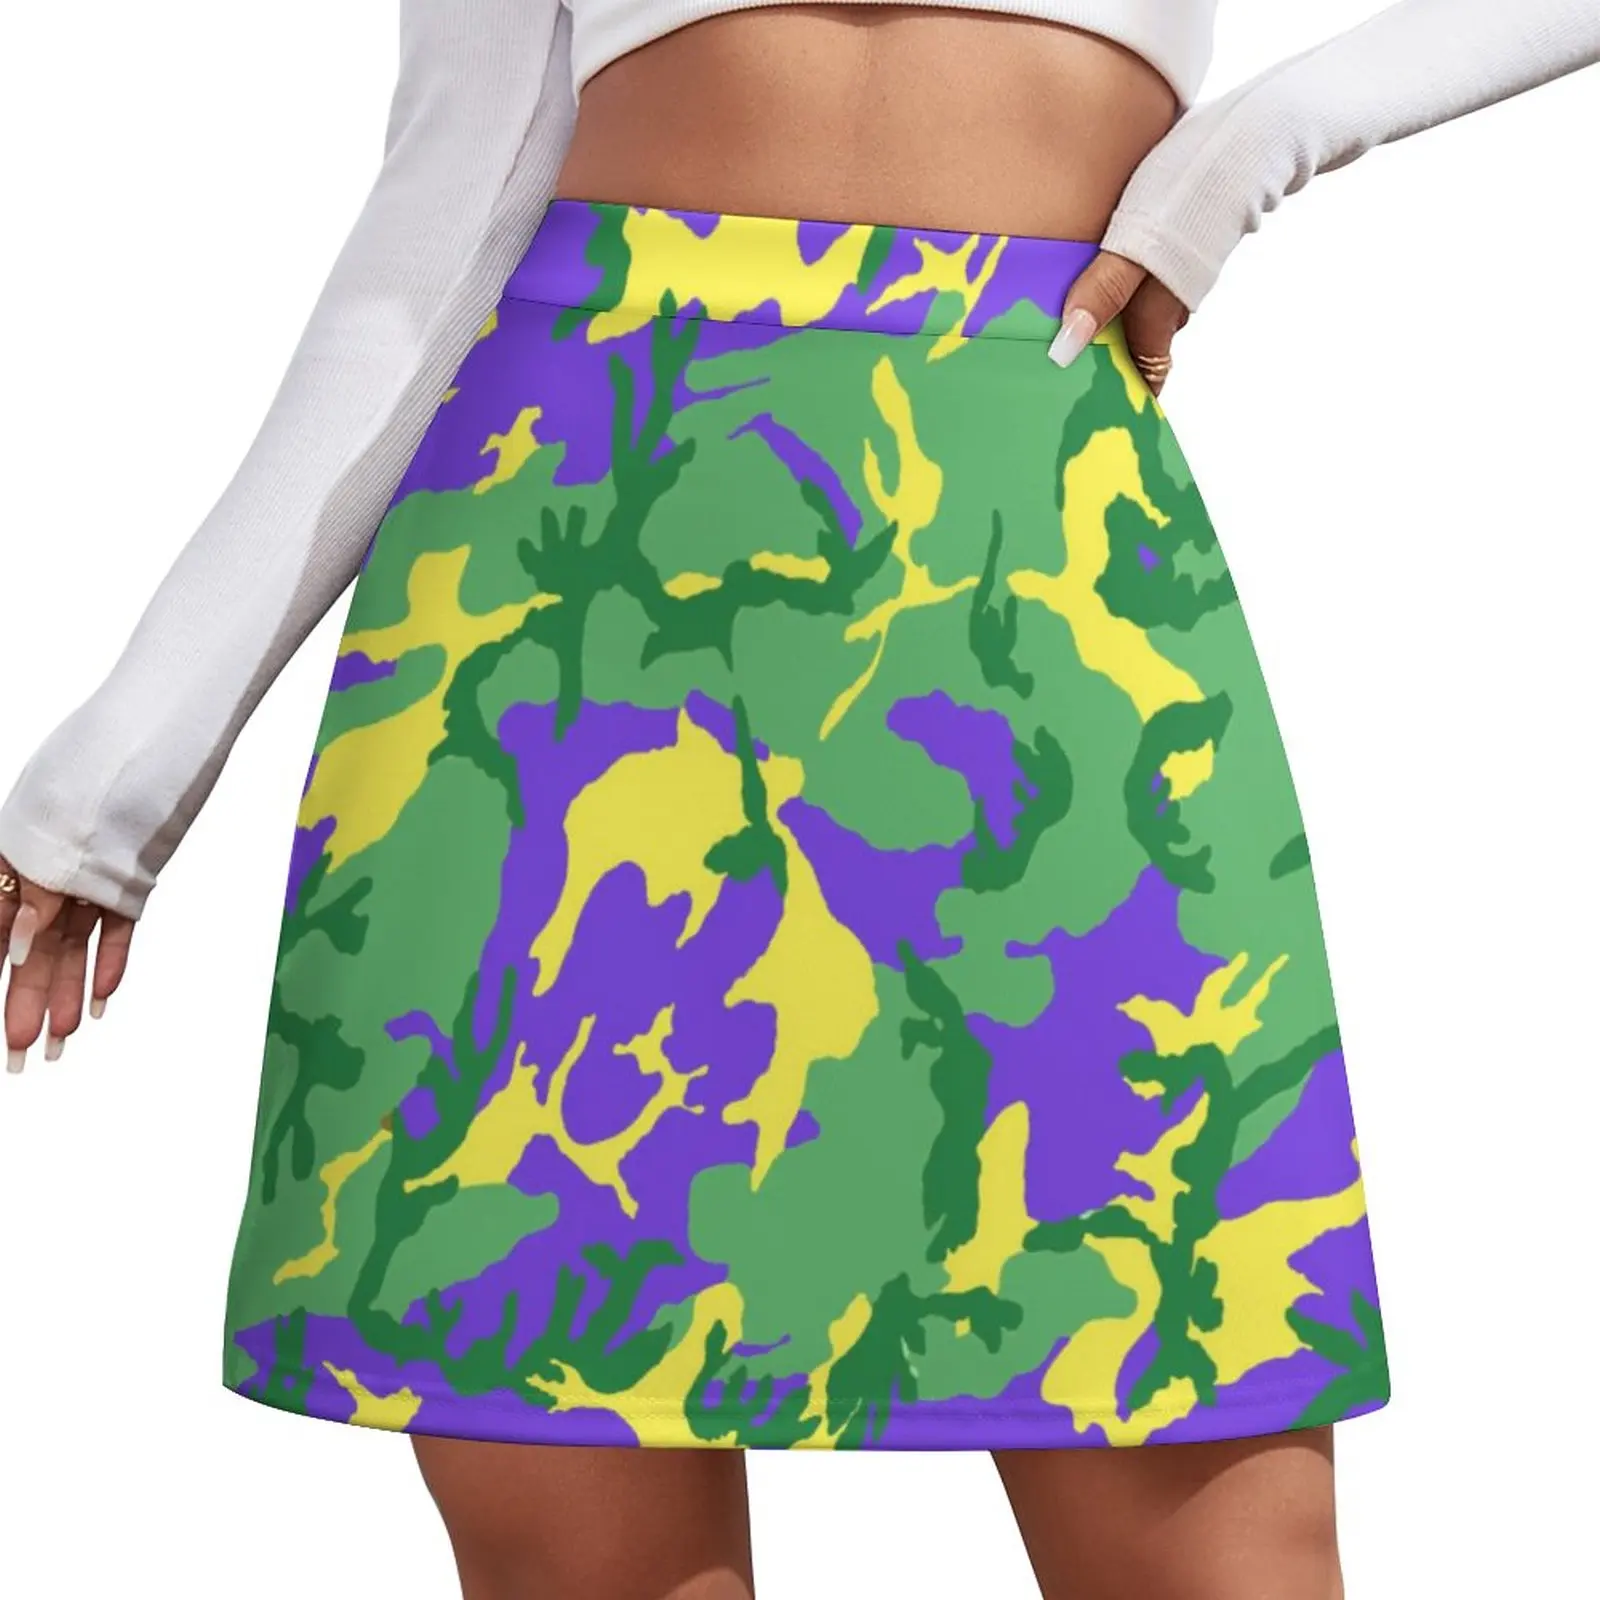 

Mardi Gras Camo Skirt Summer Colorful Camouflage Aesthetic Casual A-line Skirts Cute Mini Skirt Women Printed Oversize Bottoms